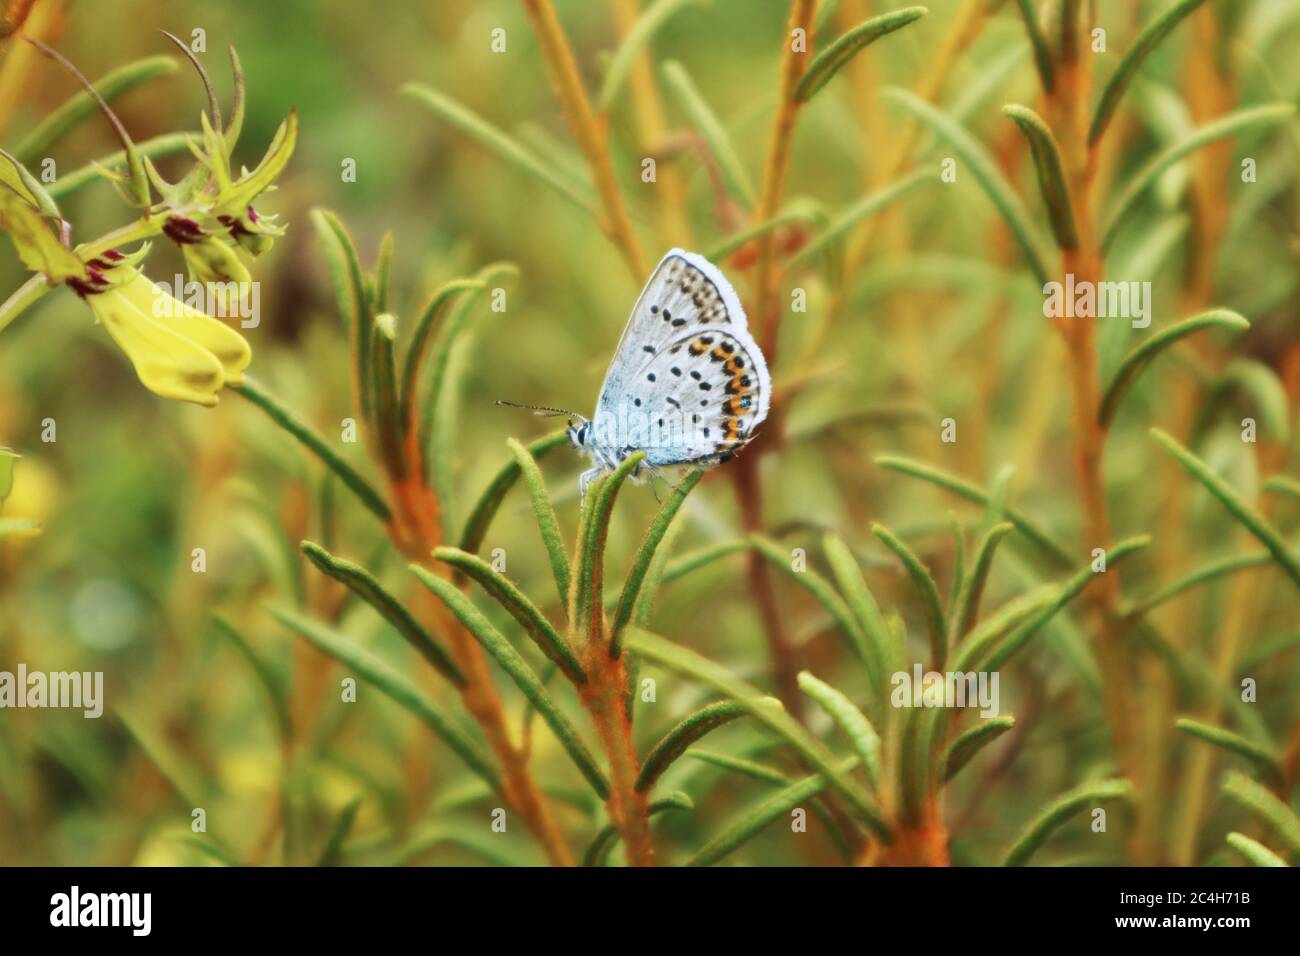 Tiny, blue butterfly called Polyommatinae. These butterflies are also commonly called the blues. Stock Photo